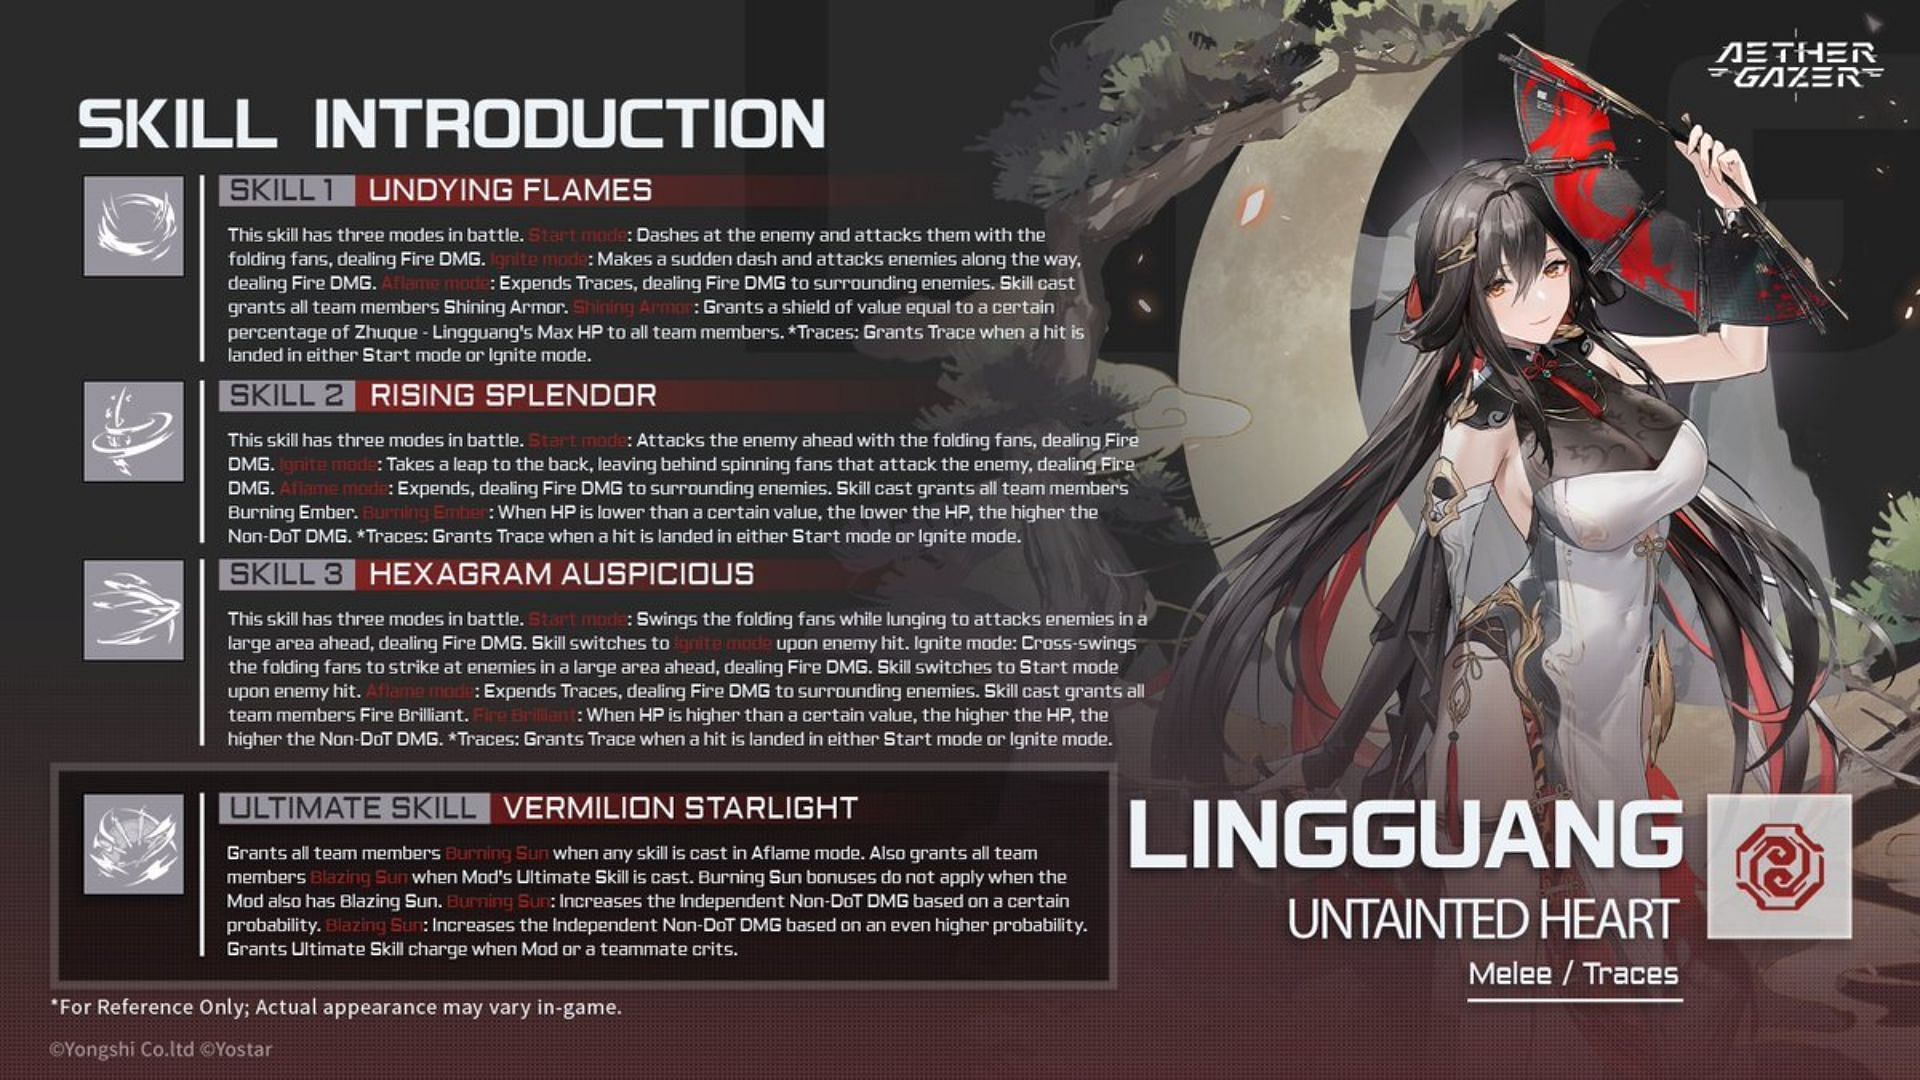 Untainted Heart - Lingguang will debut through the Aether Gazer Crepuscular Cloudsong story event. (Image via Yostar)